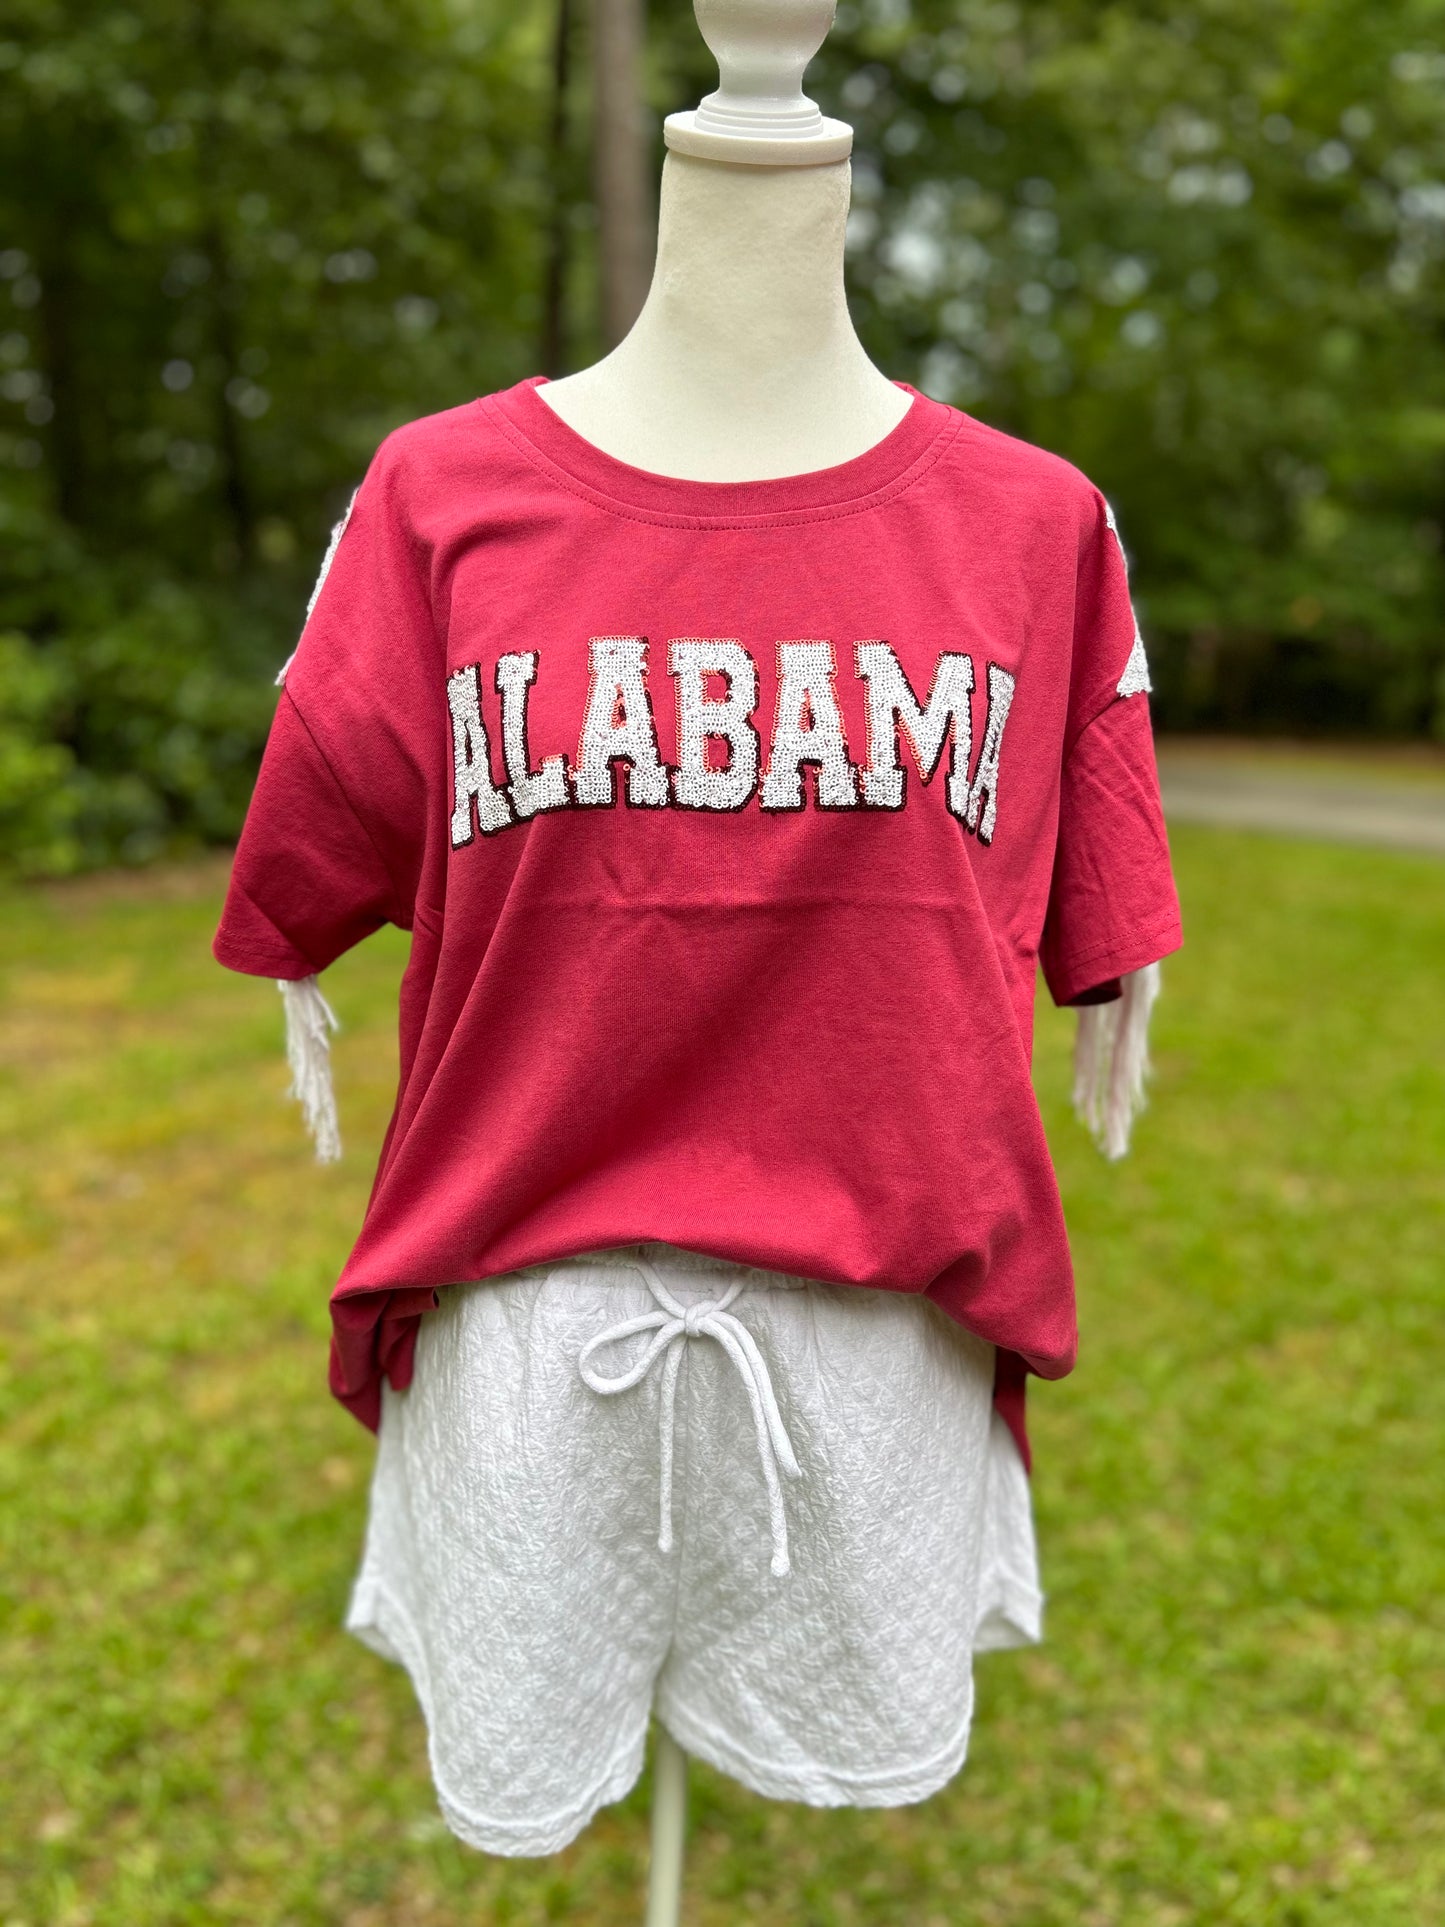 Sequin Gameday Top - multi colors!